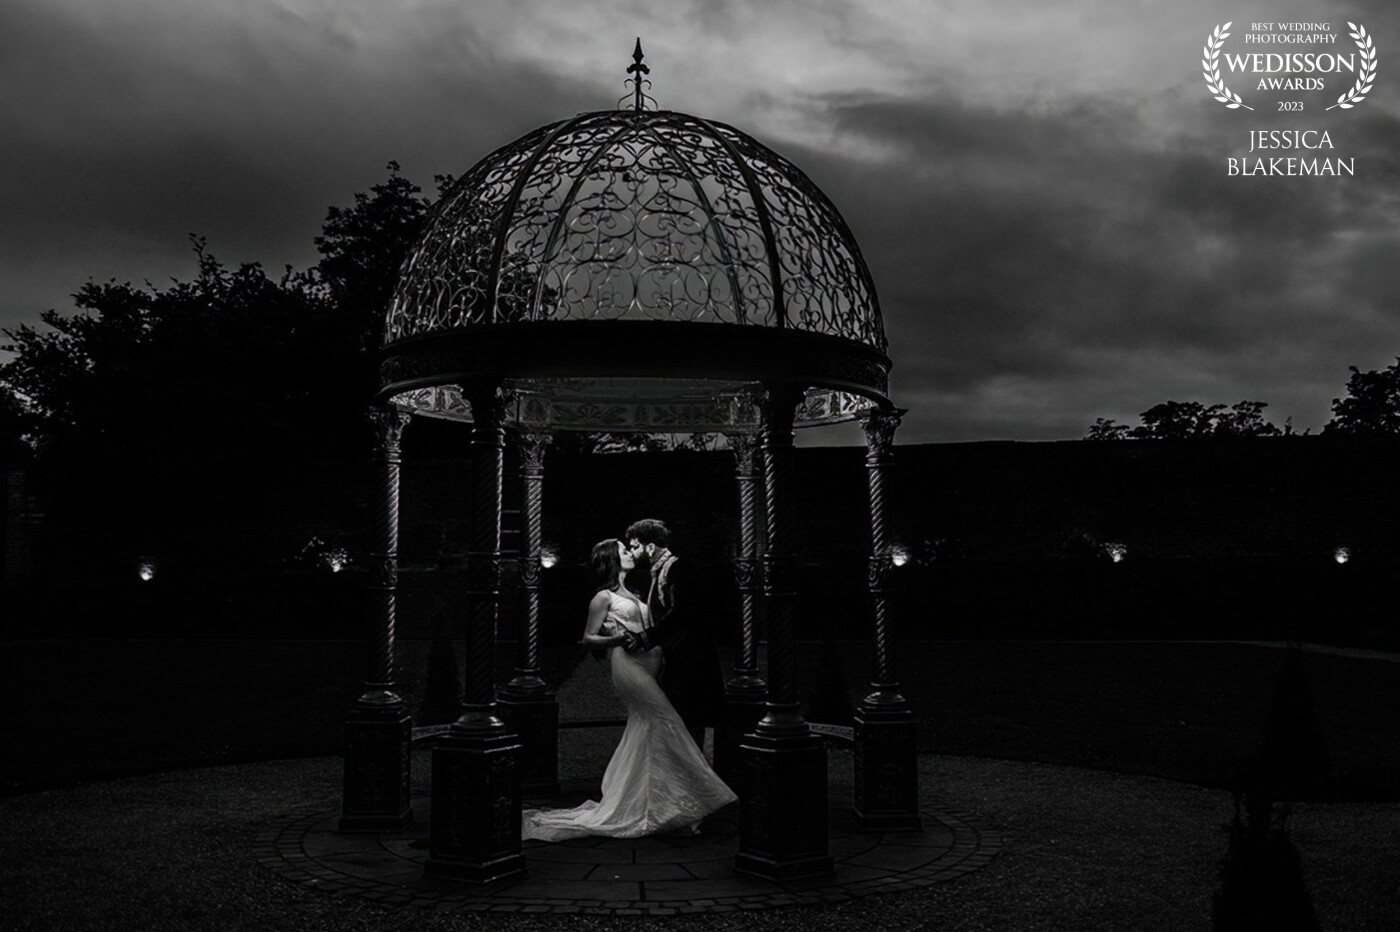 We were due to leave after the first dance but it was still light outside. I just knew I just had to wait for it to get a little darker to grab this shot. I'm so happy we stayed behind!